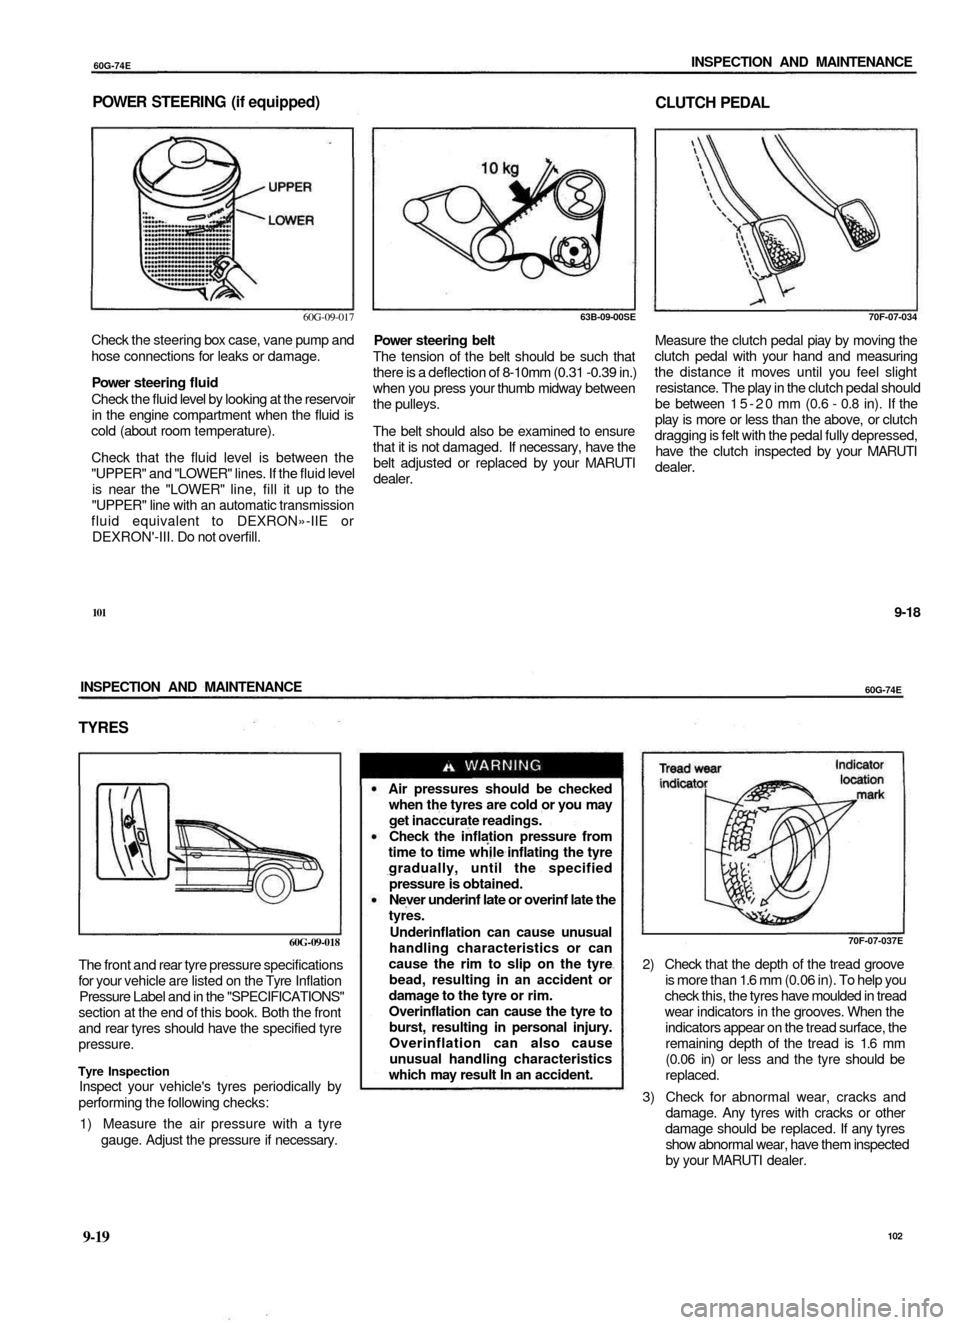 SUZUKI BALENO 1999 1.G User Guide 
60G-74E 
INSPECTION AND MAINTENANCE

POWER STEERING (if equipped)

CLUTCH PEDAL

60G-09-017

Check the steering box case, vane pump and

hose connections for leaks or damage.

Power steering fluid

C